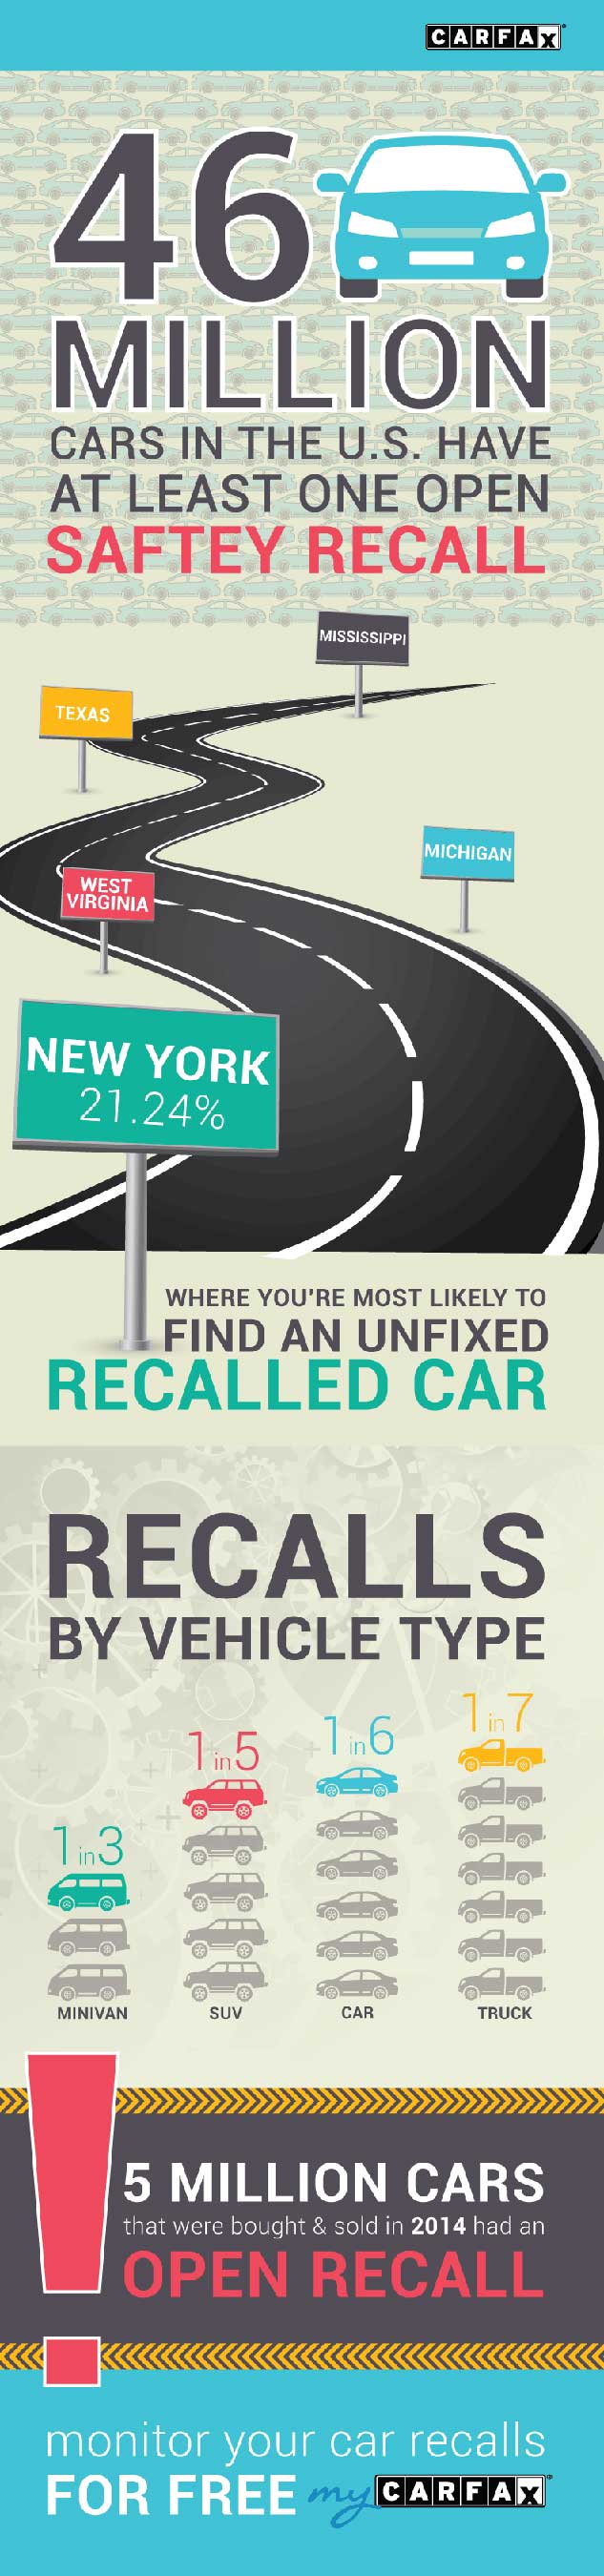 Key recall findings infographic